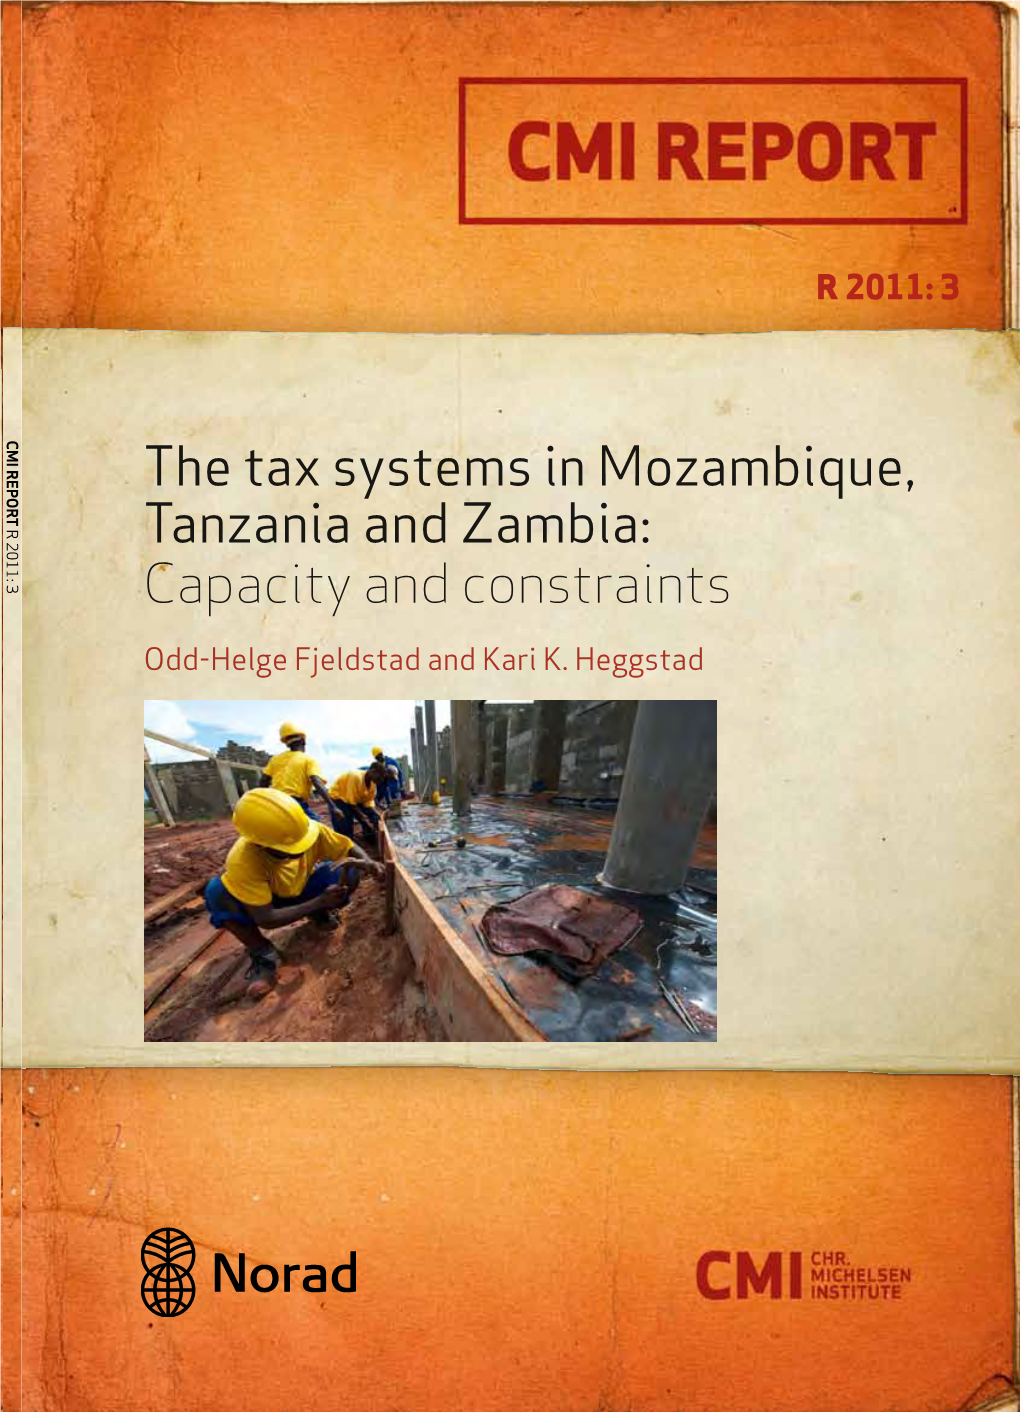 The Tax Systems in Mozambique, Tanzania and Zambia